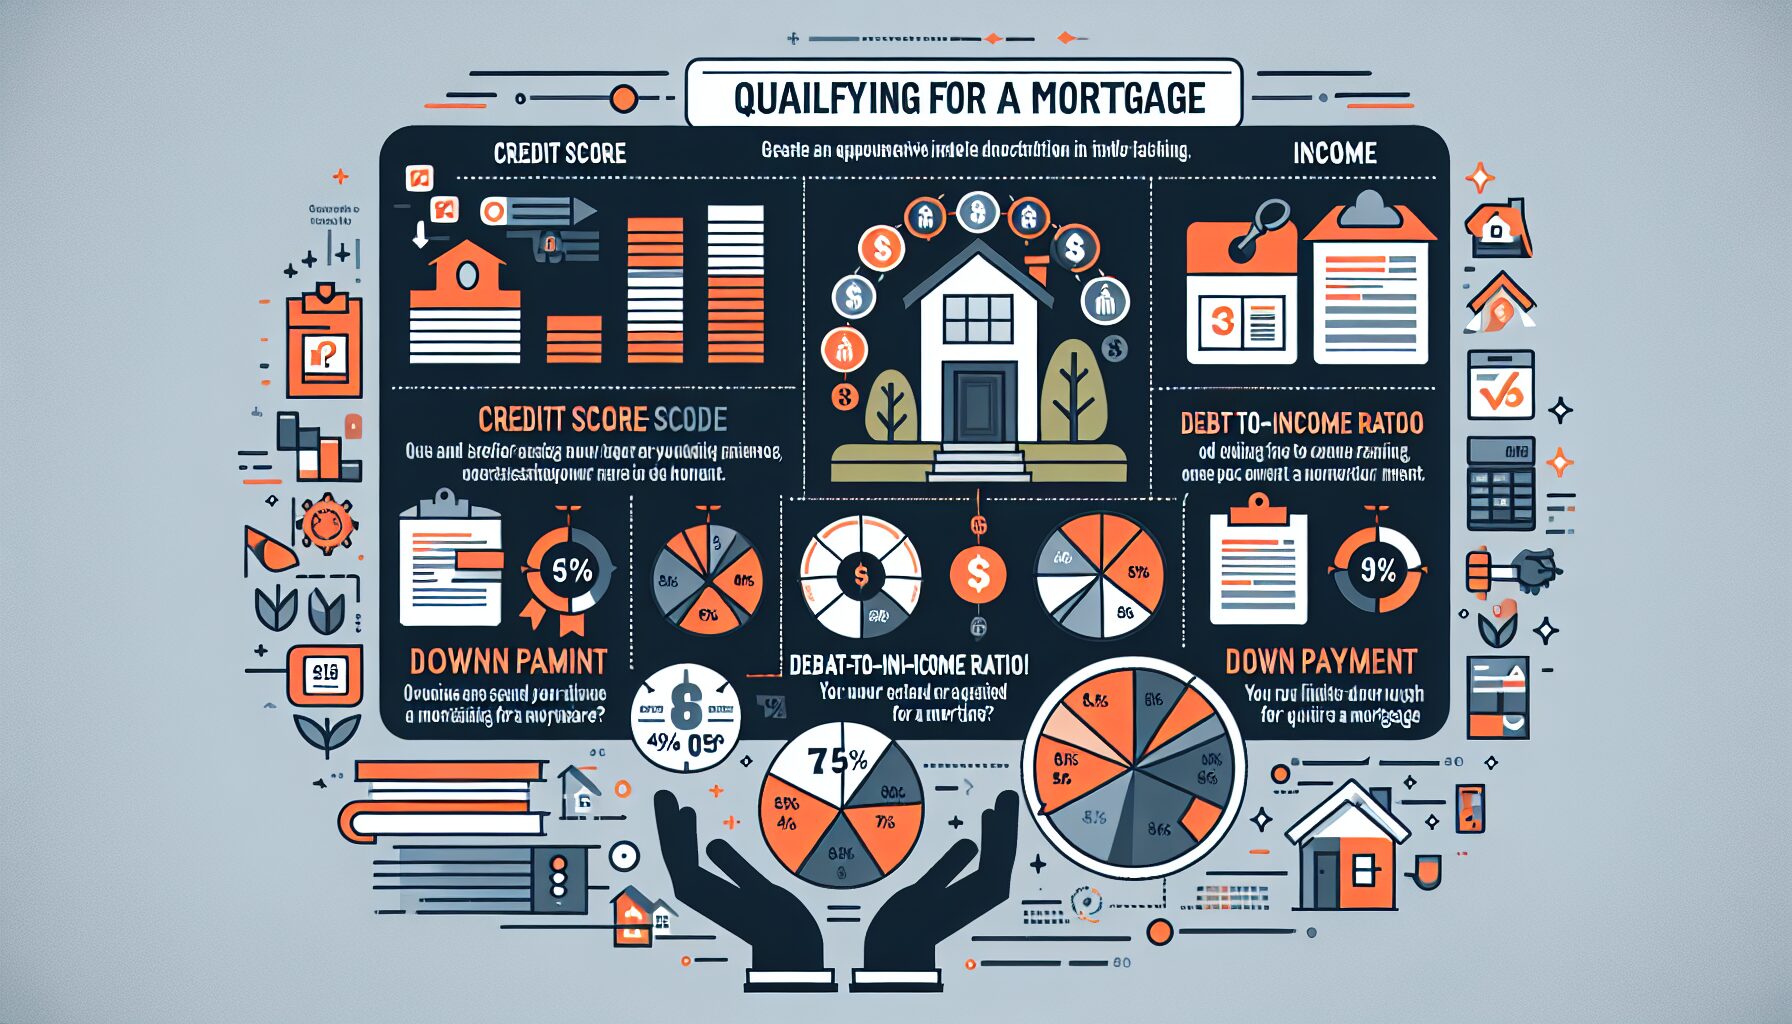 How Easy Is It To Qualify For A Mortgage?